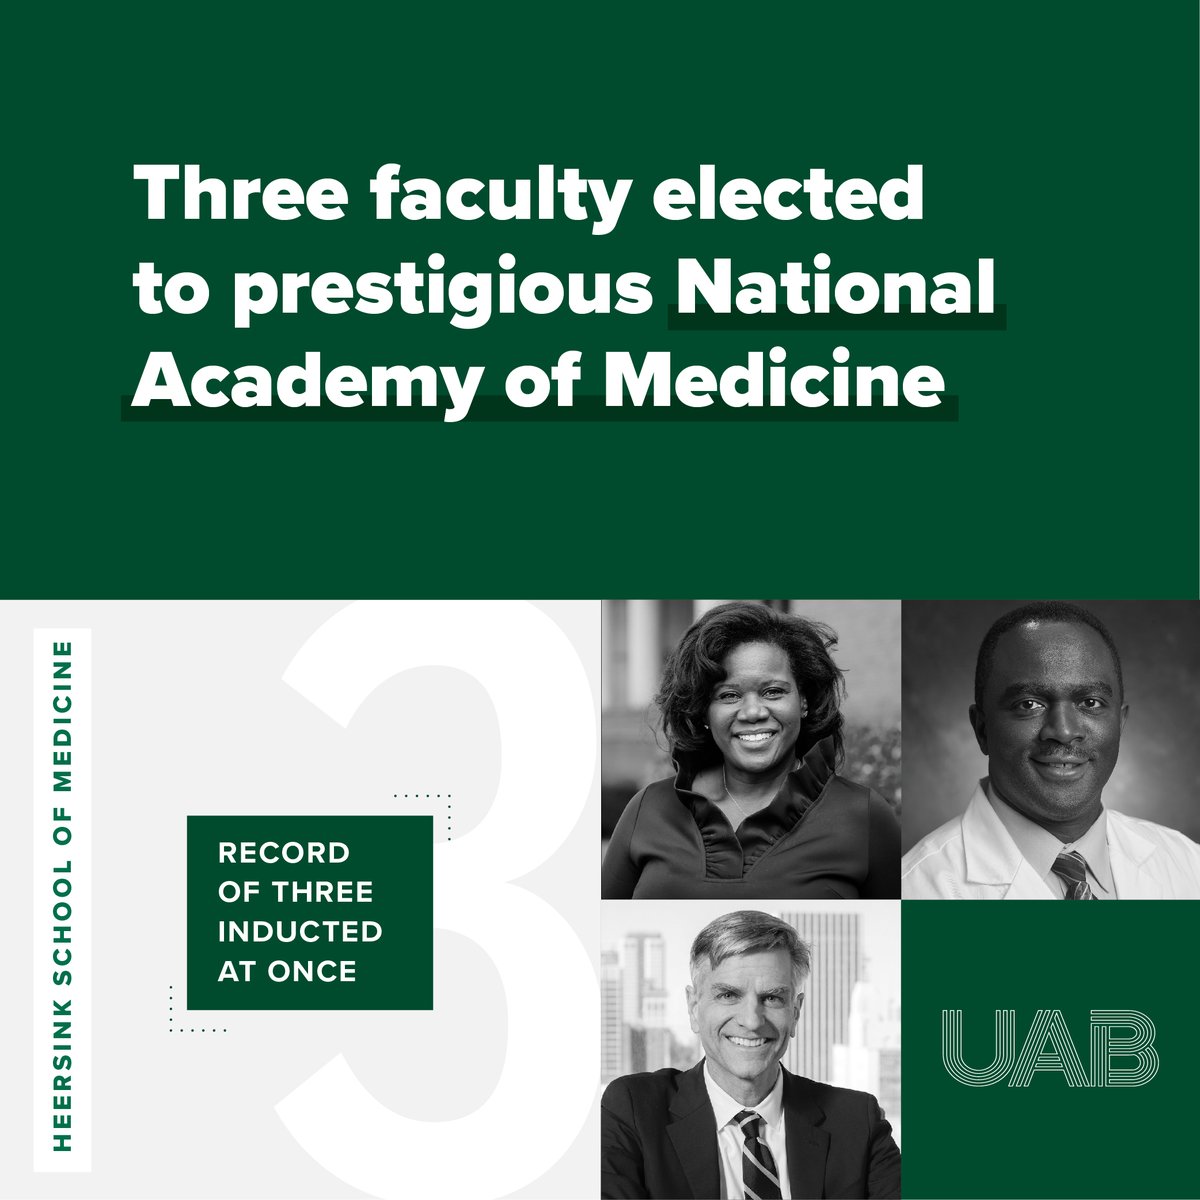 Today, 3 faculty were inducted to @theNAMedicine joining 12 other current or past faculty from UAB It is the first time in UAB’s history three have been inducted in the same year @atitapatterns @CarmelleElieMD Read the full release: uab.edu/news/people/it…